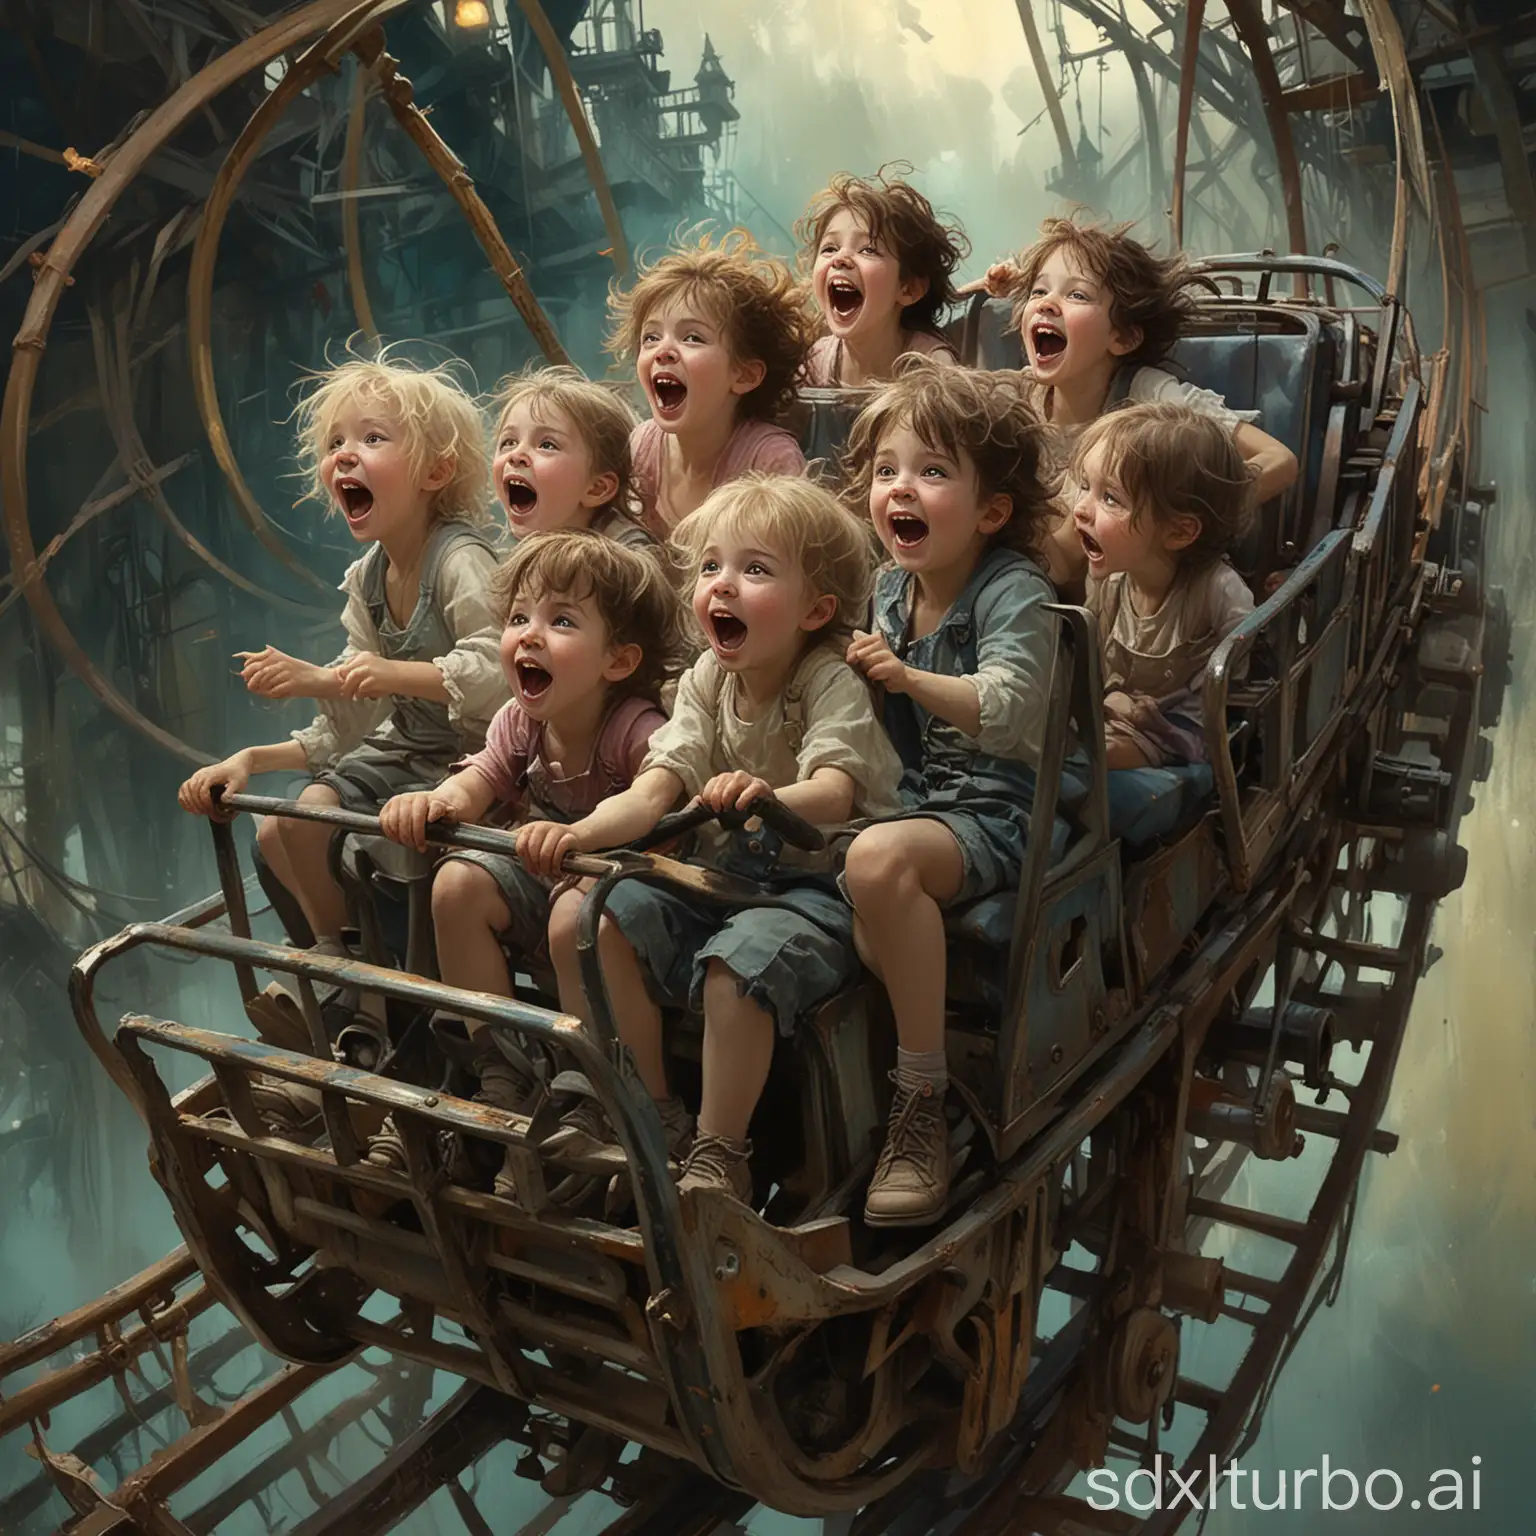 A group of children sitting in a roller coaster, screaming, going down, fun times,in the style of Harrison Fisher and Brian Froud and Jeremy Mann,  
Whimsical, vibrant colors, gloss, sweetness, surreal, thick brush strokes, layered textures, mythical, magical.